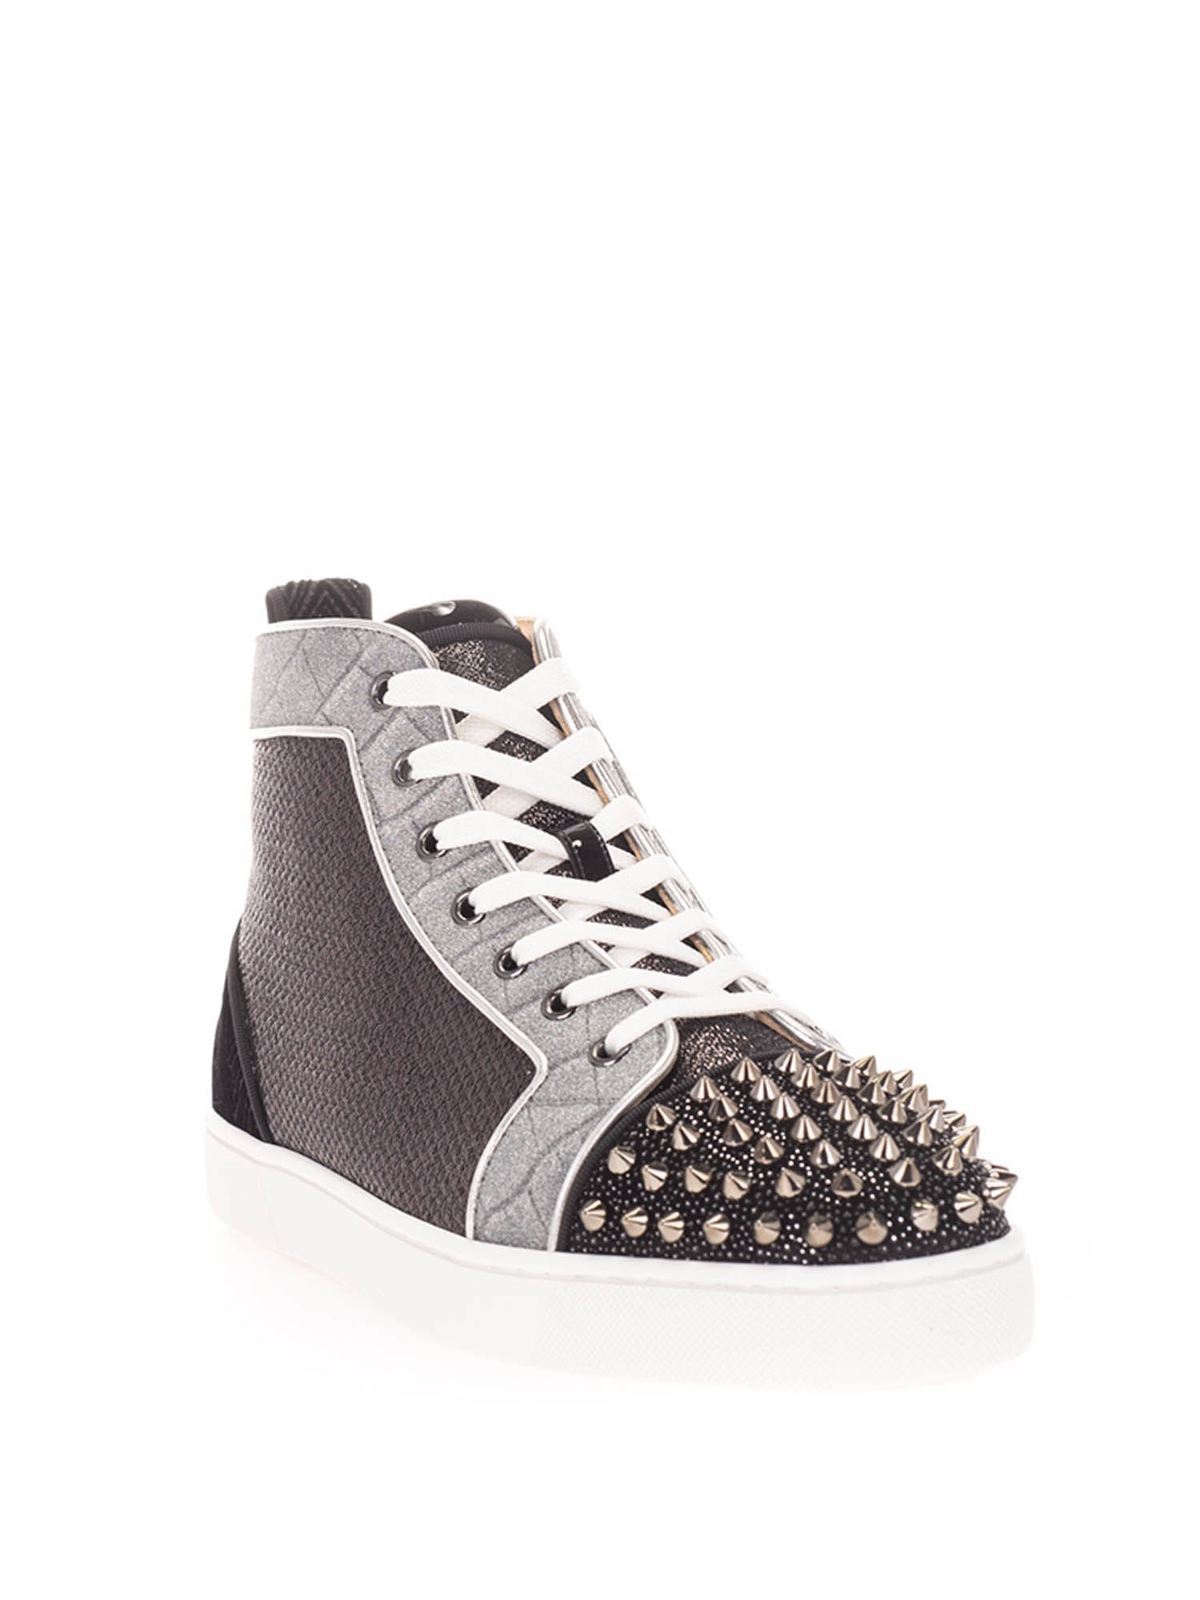 Trainers Christian Louboutin - Lou Spikes Orlato sneakers in black 